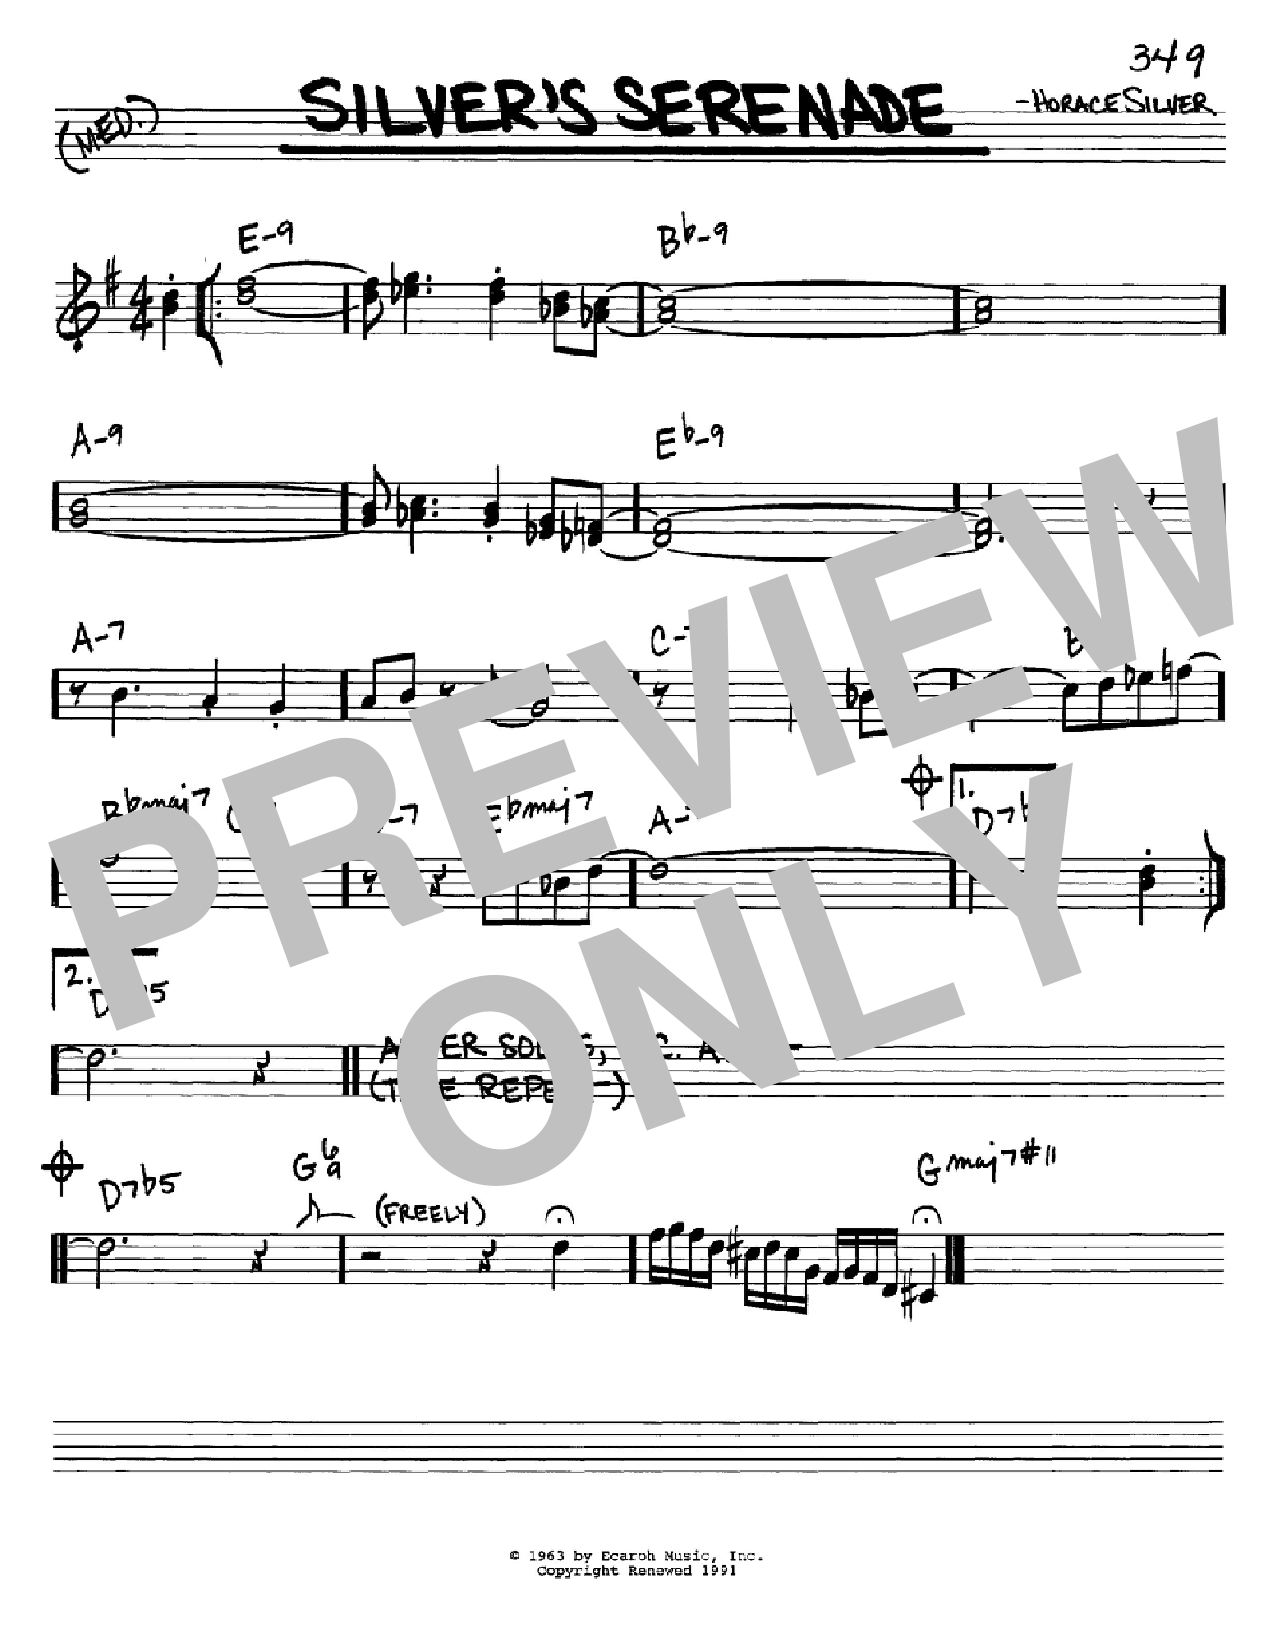 Download Horace Silver Silver's Serenade Sheet Music